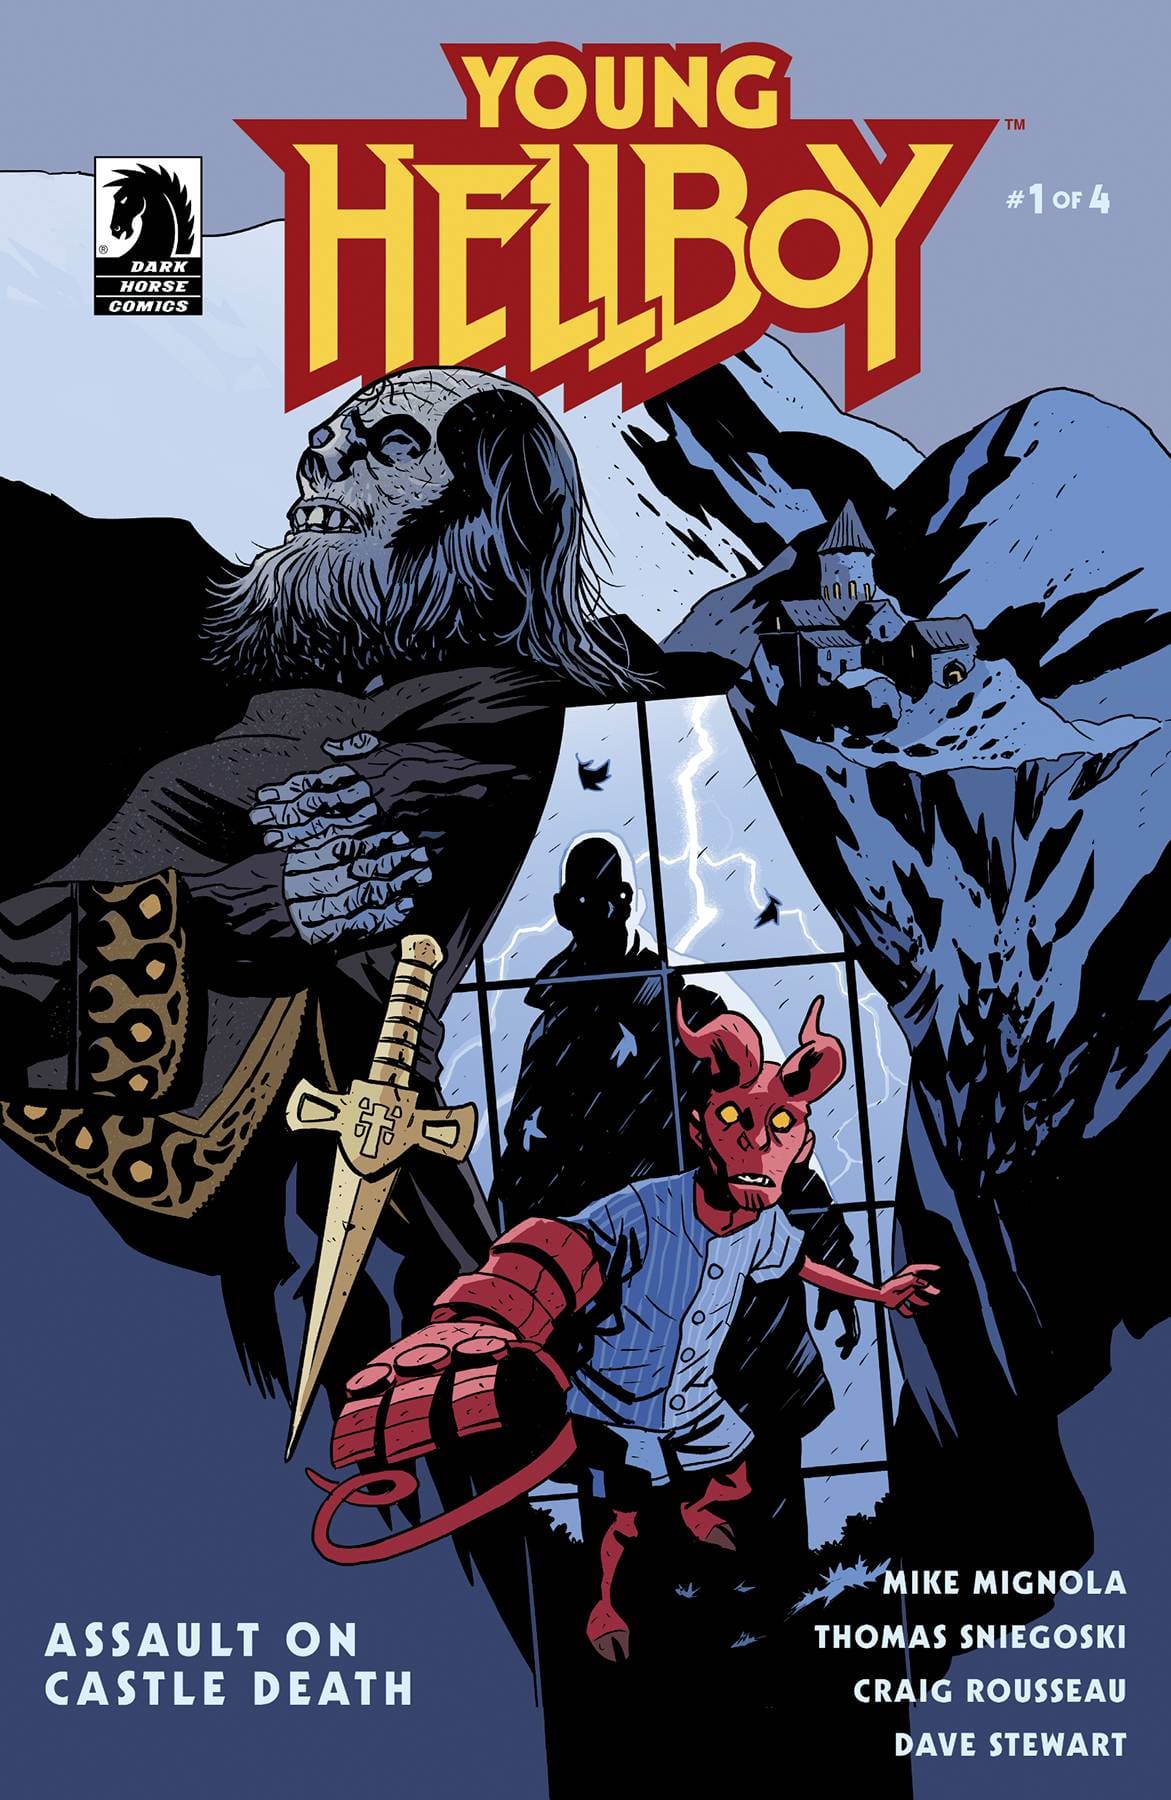 YOUNG HELLBOY ASSAULT ON CASTLE DEATH #1 (OF 4) CVR A SMITH - Third Eye